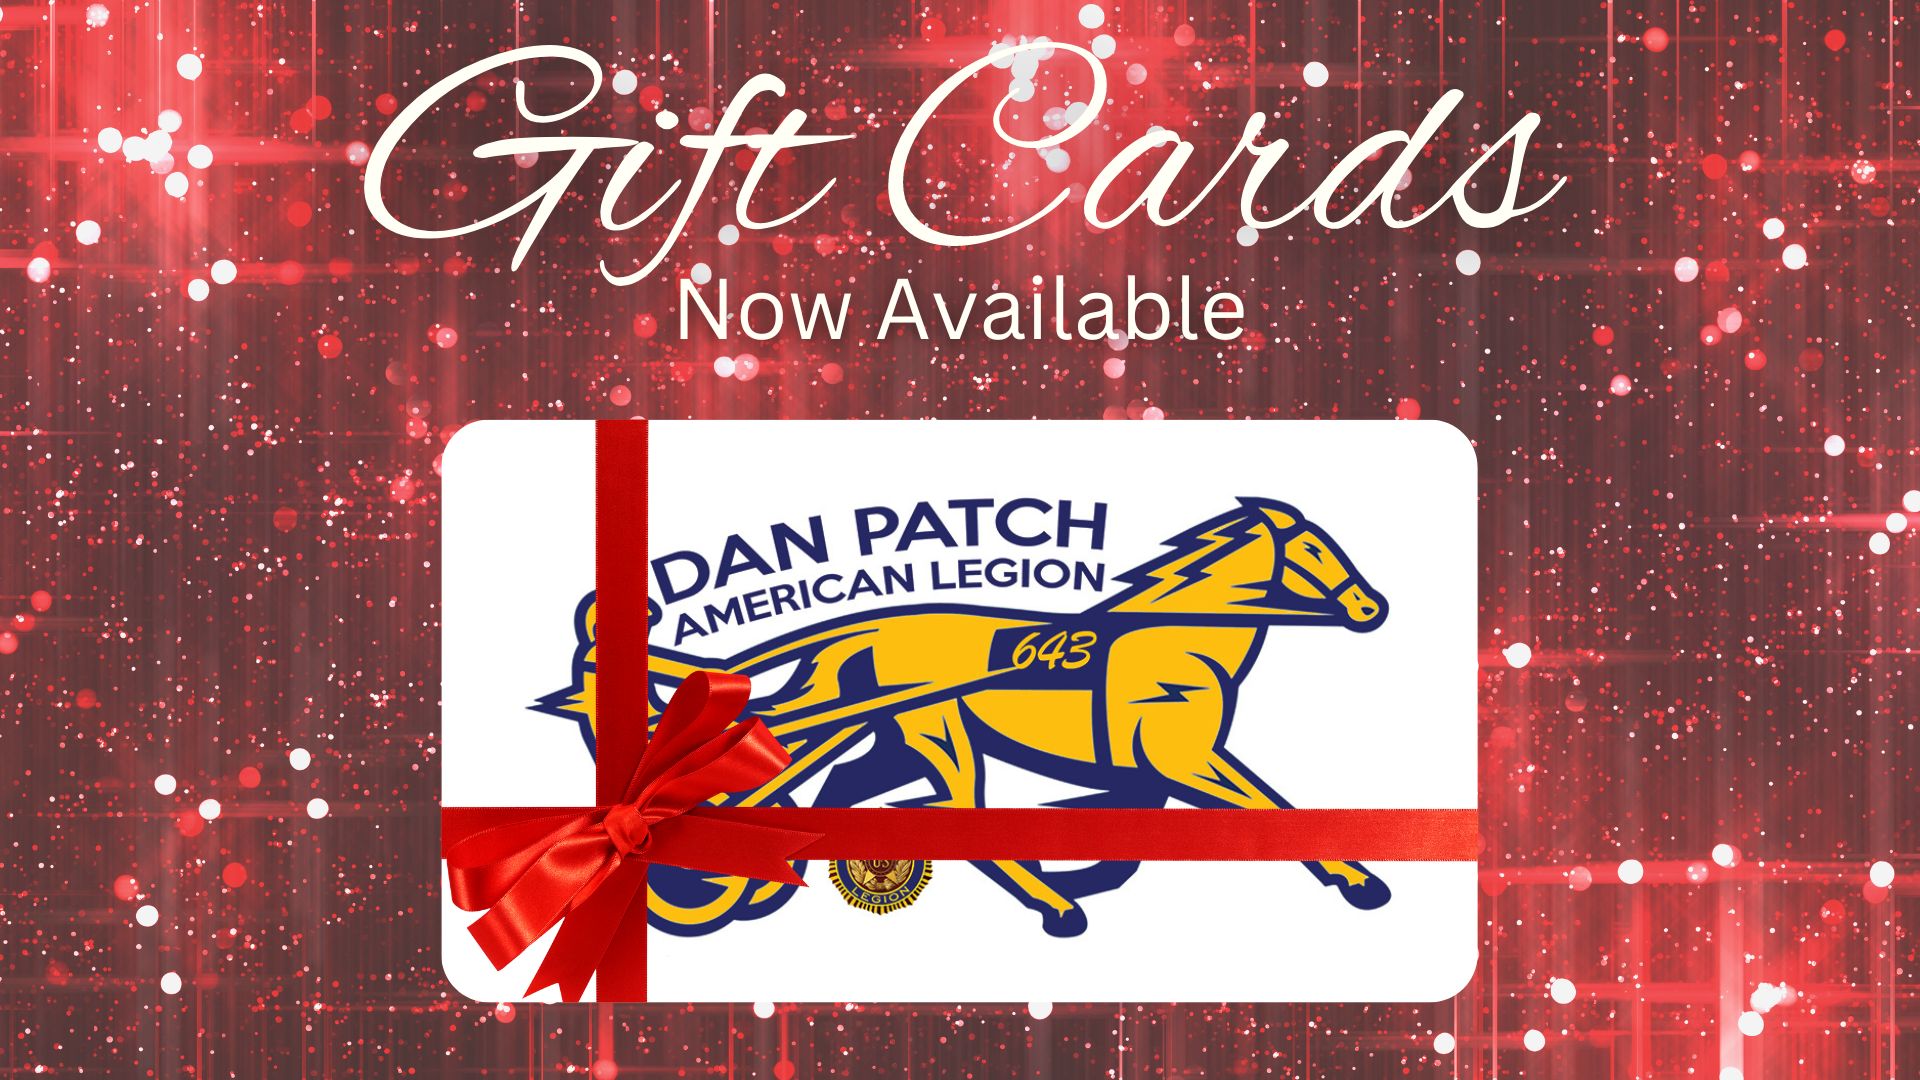 gift cards now available on red text with image of gift card with red bow pictured